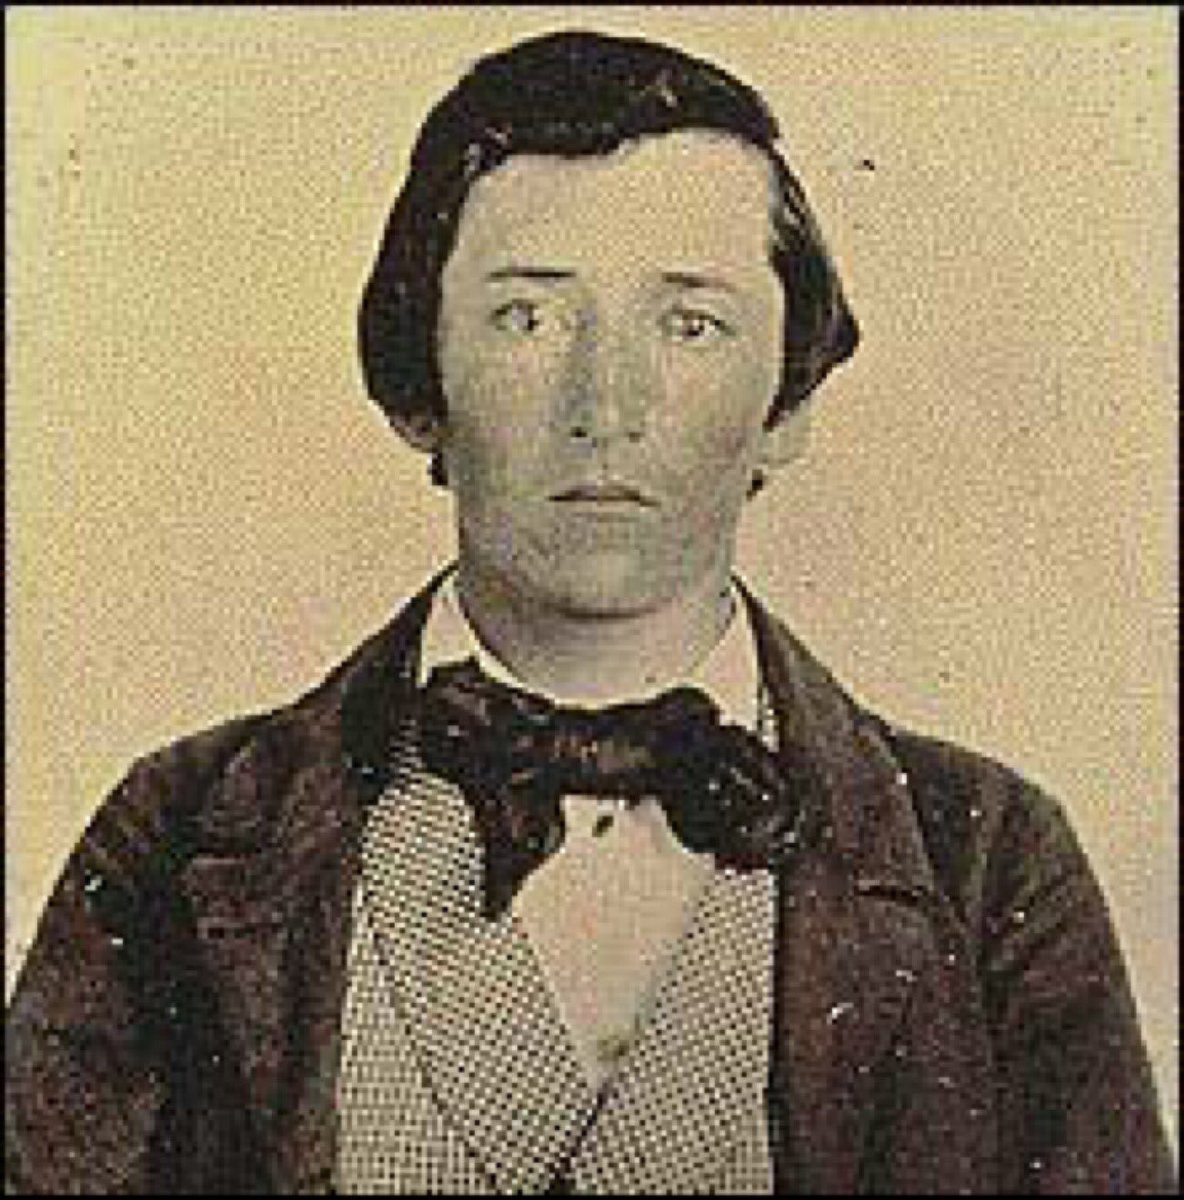 William Clarke Quantrill was born  #OTD in 1837 in Dover, Ohio. Prior to the  #CivilWar, he led an unsettled life, regularly changing his occupation and location. He also routinely broke the law, including killing a man in Mendota, IL, robbing homes, and stealing livestock.